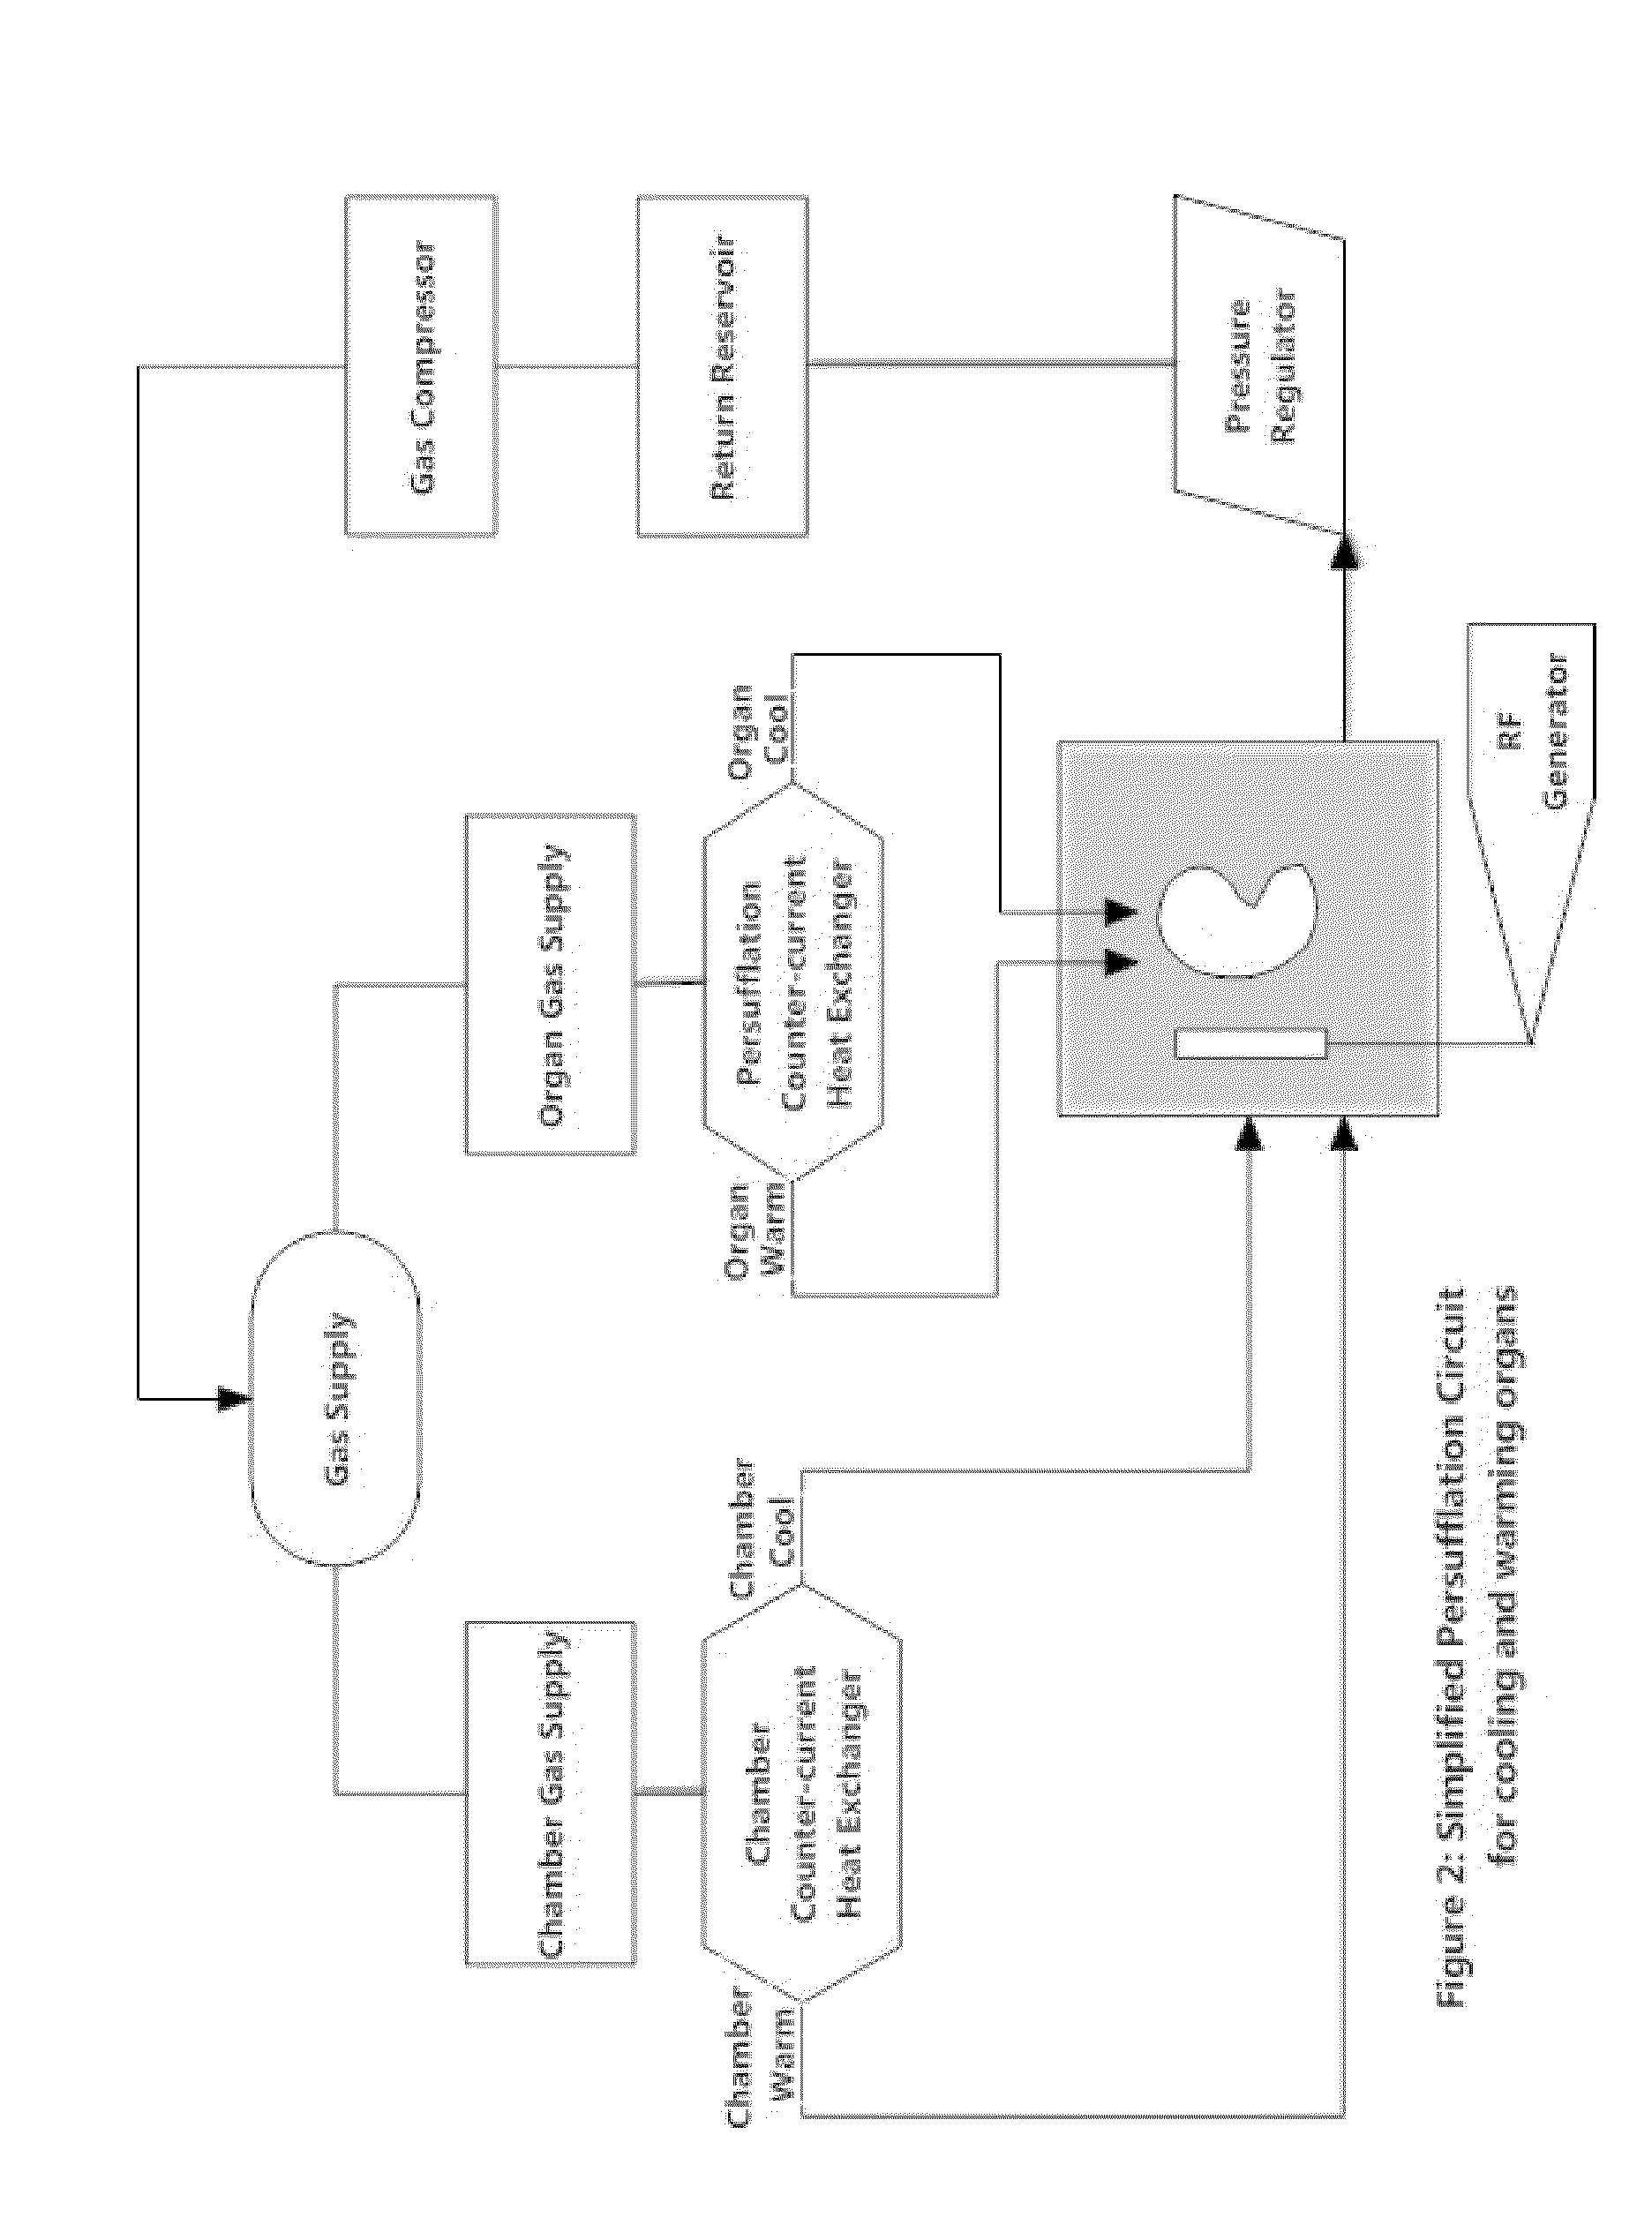 Method and apparatus for prevention of thermo-mechanical fracturing in vitrified tissue using rapid cooling and warming by persufflation